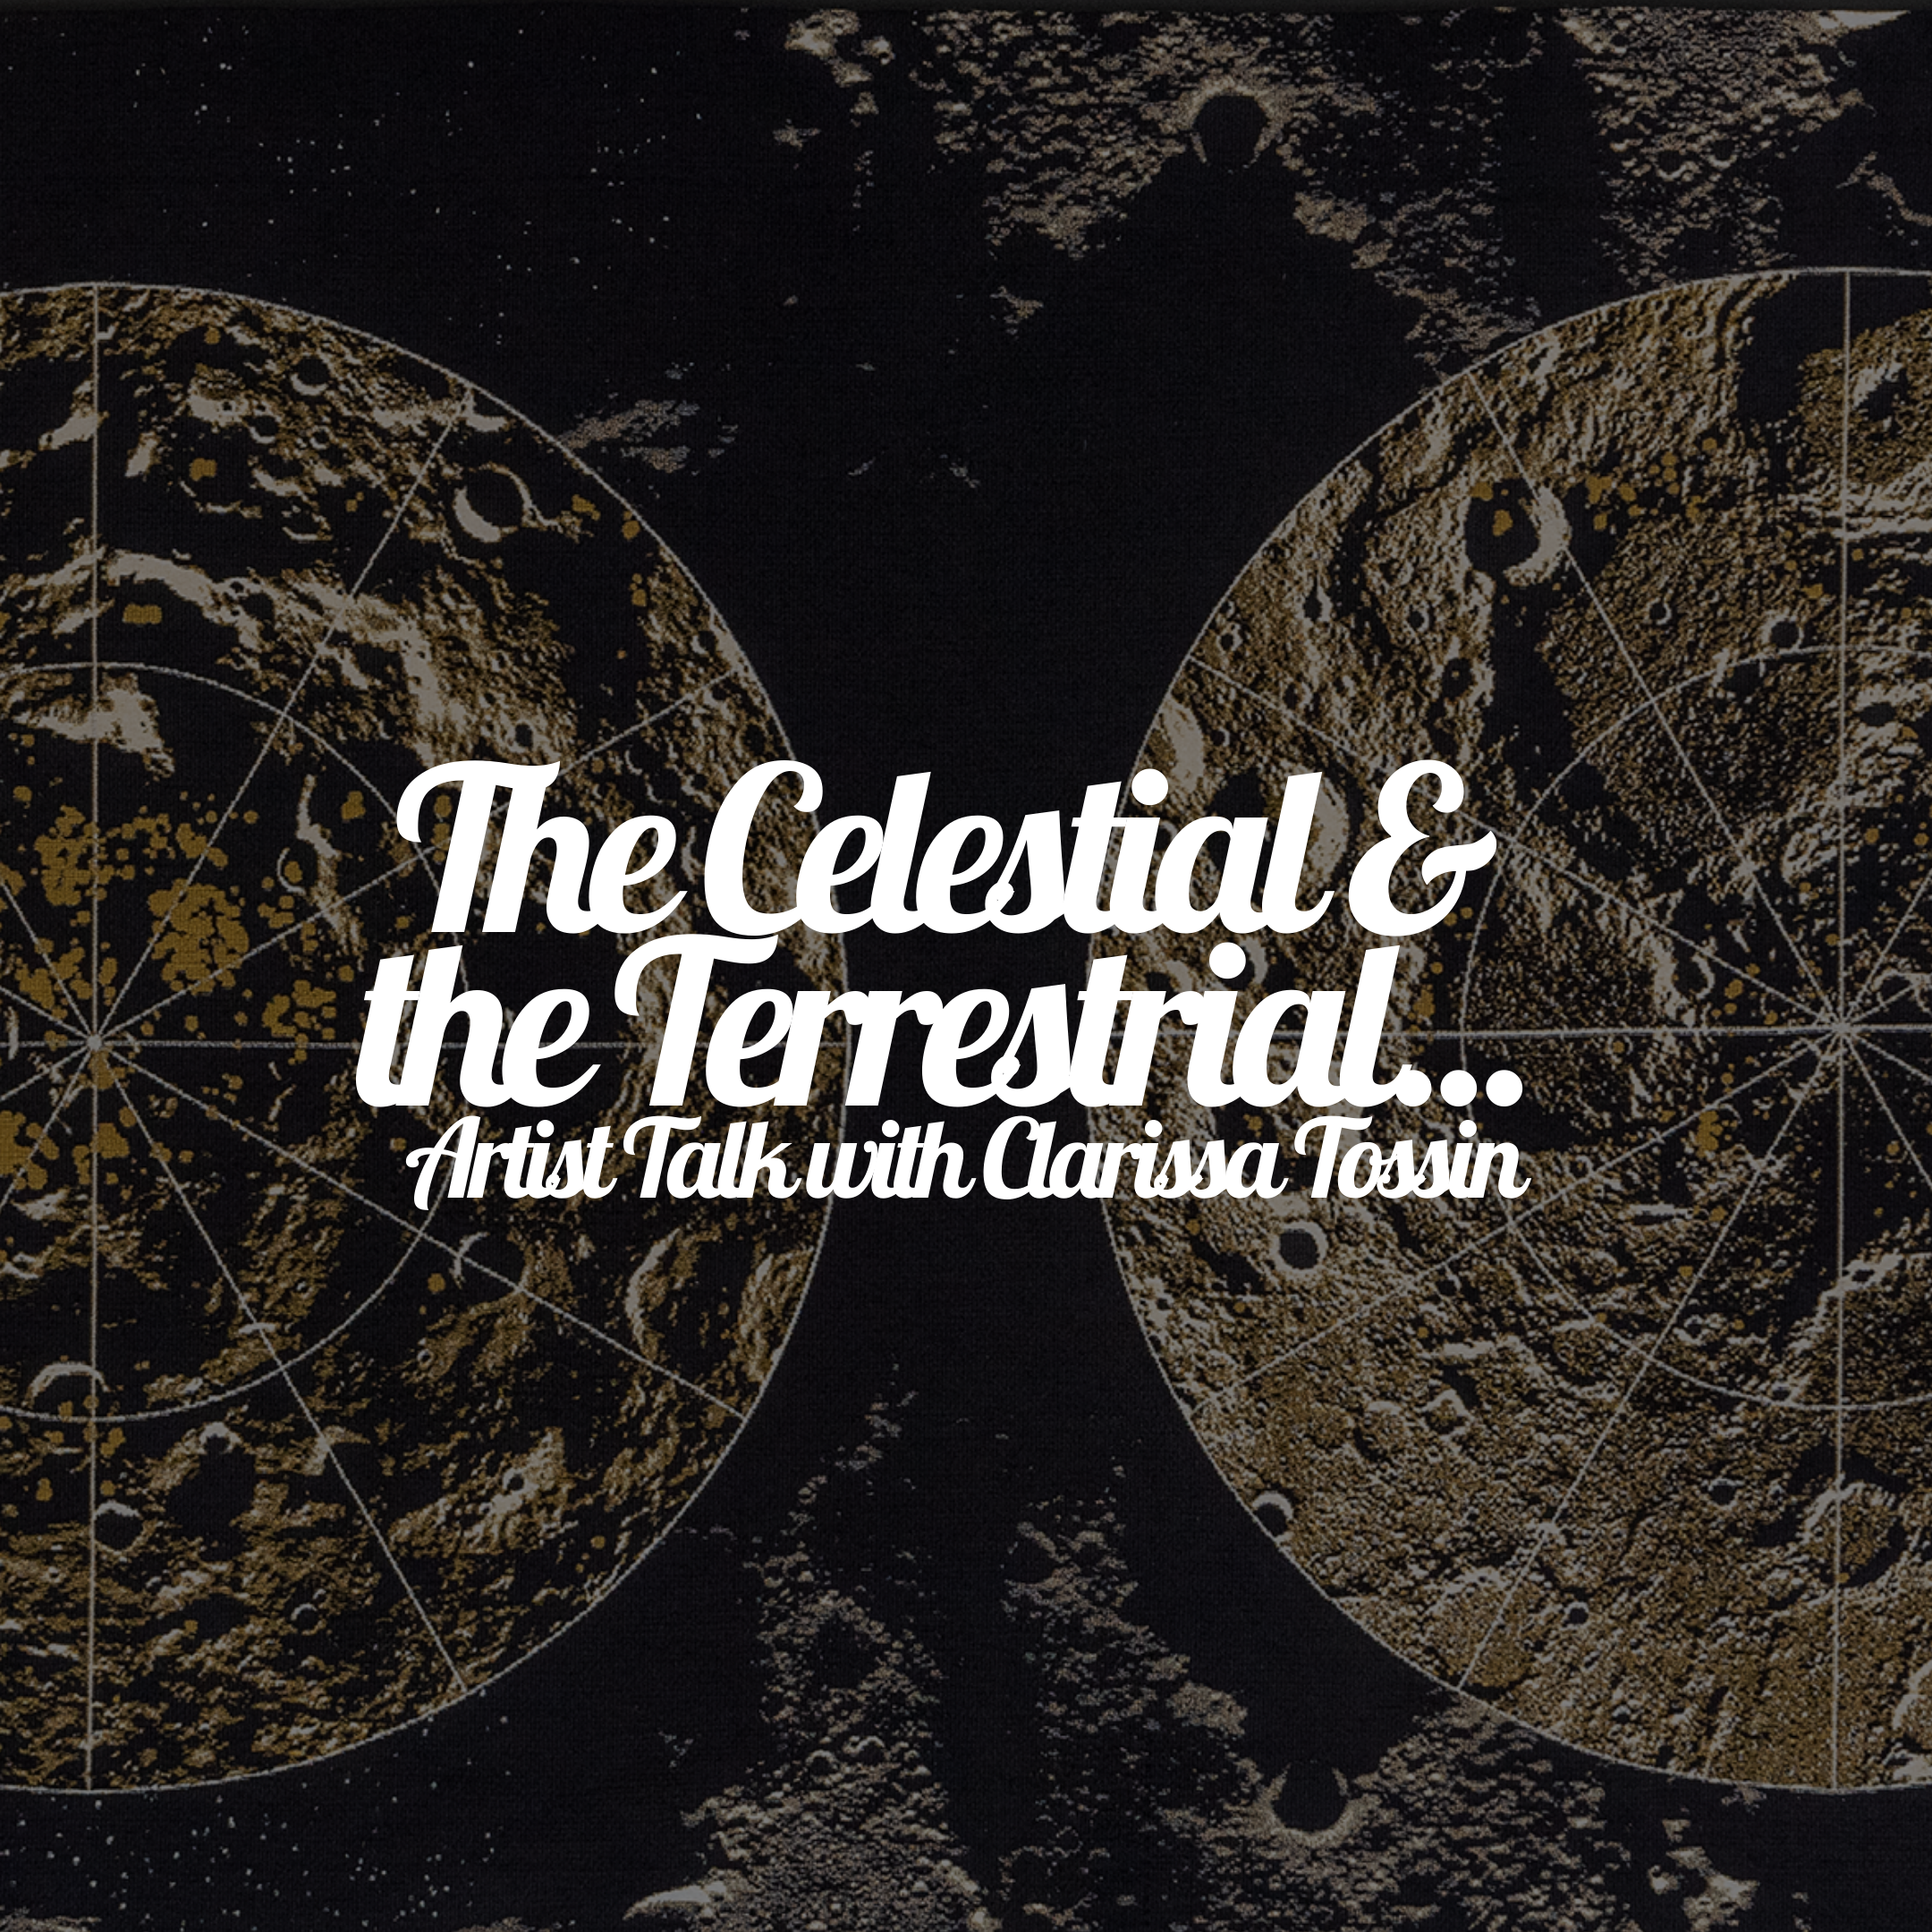 Close up of what looks like an image captured in space. There are two planet-like objects in the image with pie charts overlaid on top of them. On top of the image itself, there’s text that reads, “The celestial & the terrestrial…artist talk with Clarissa Tossin” in white, fancy font.